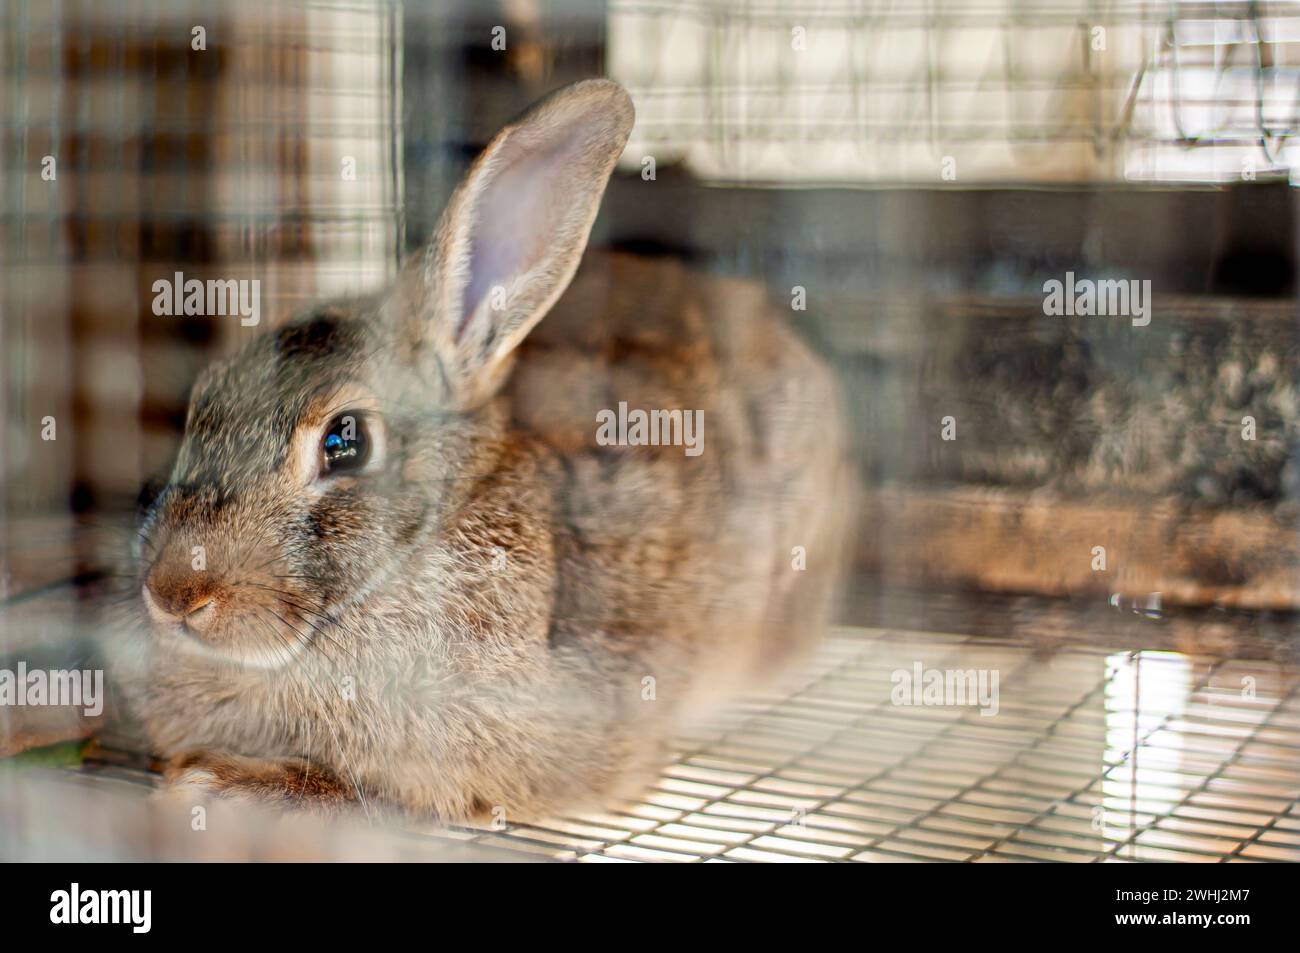 Rabbit inside a cage Stock Photo